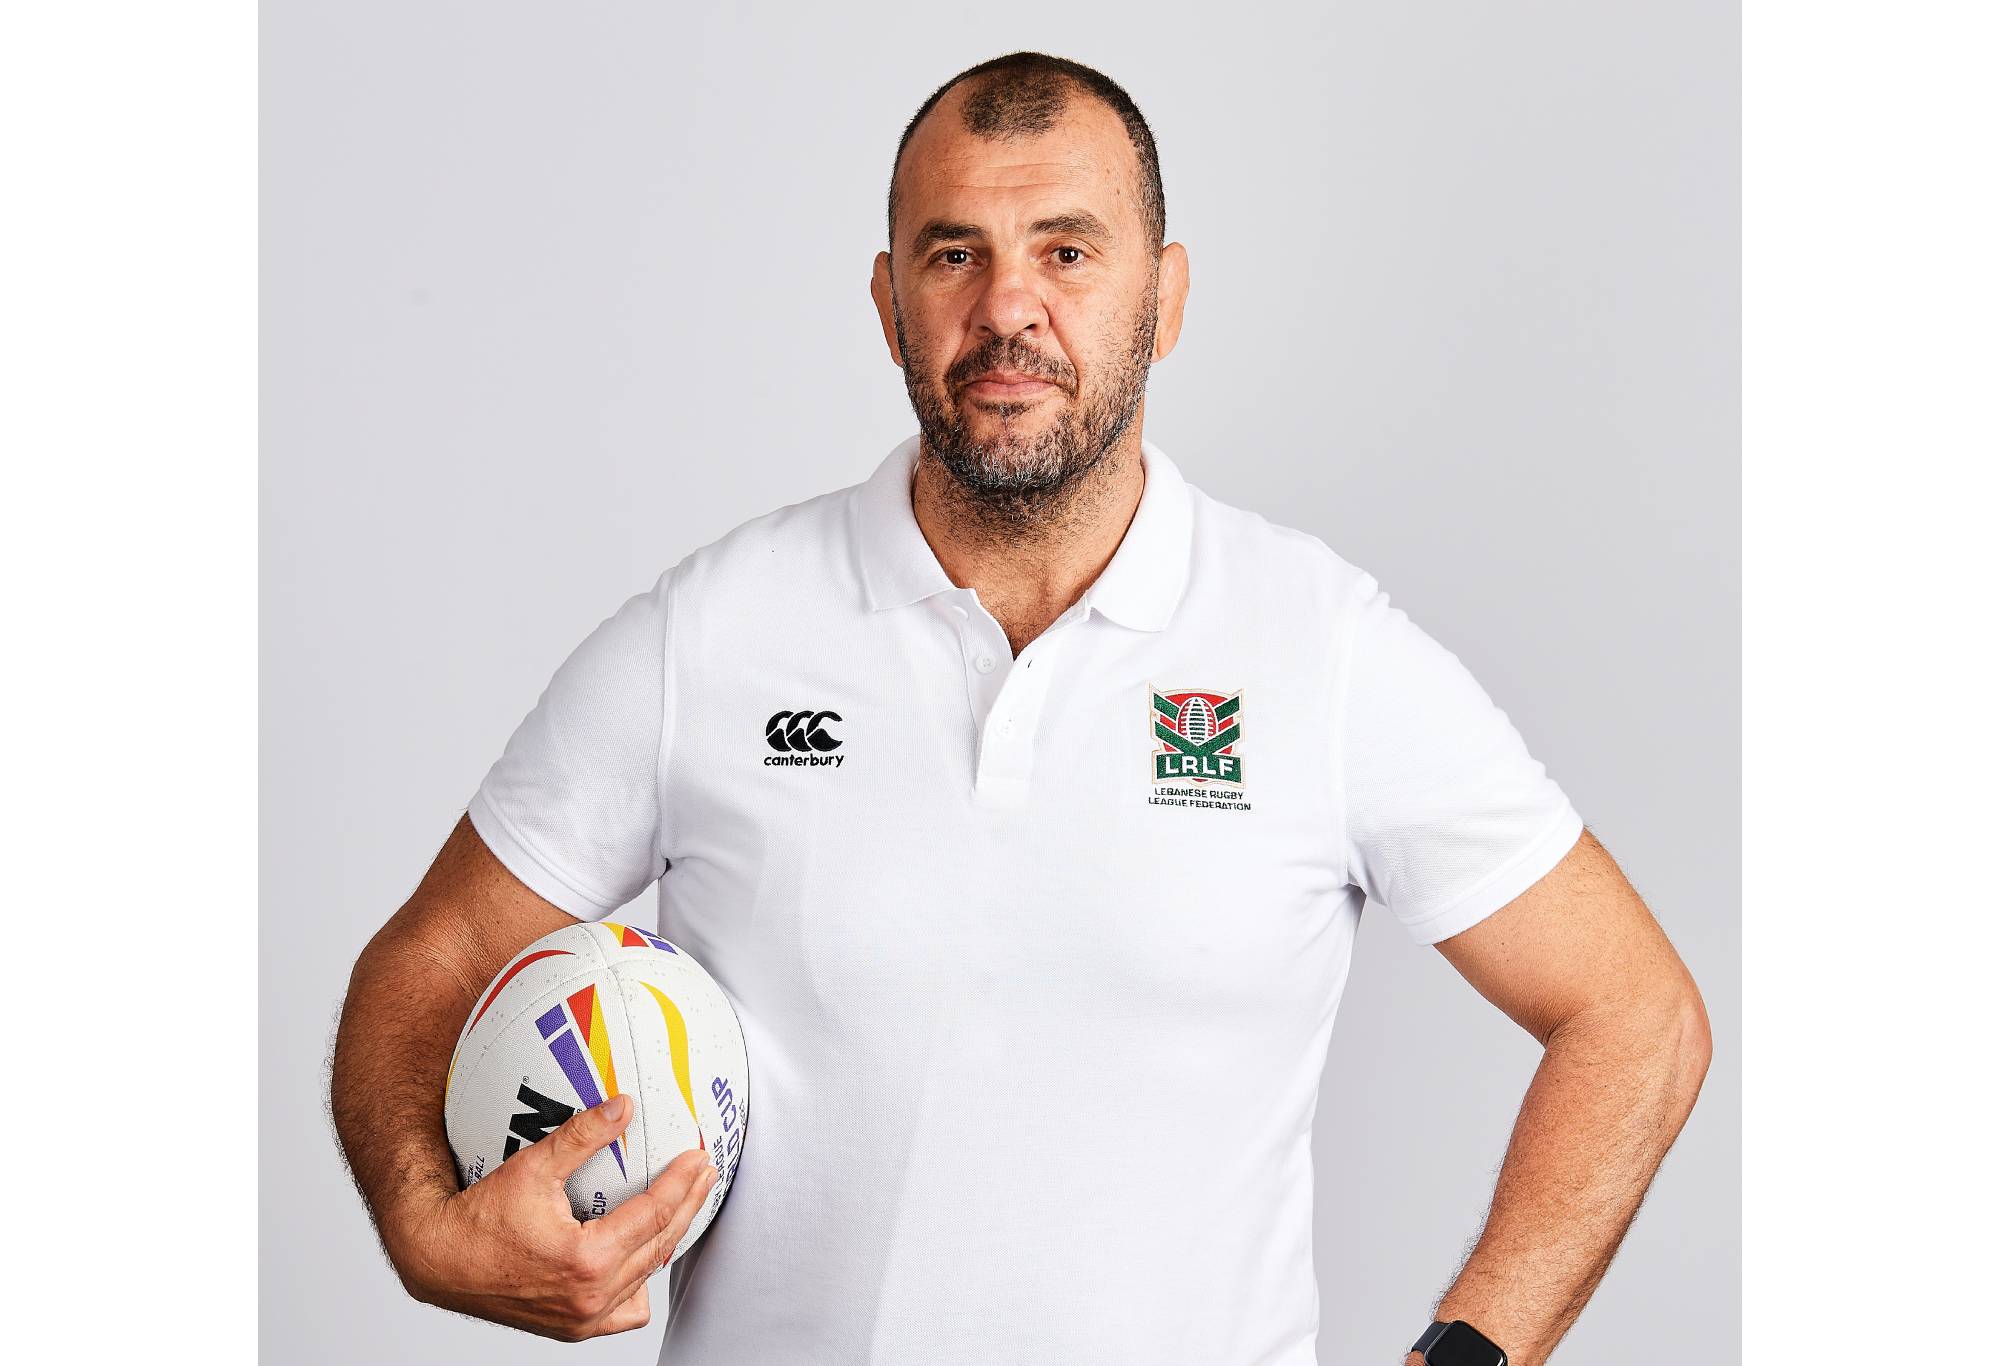 MANCHESTER, ENGLAND - OCTOBER 06: Michael Cheika of Lebanon poses for a photo during the Lebanon Rugby League World Cup Portrait session on October 06, 2022 in Manchester, England. (Photo by Gareth Copley/Getty Images for Rugby League World Cup)